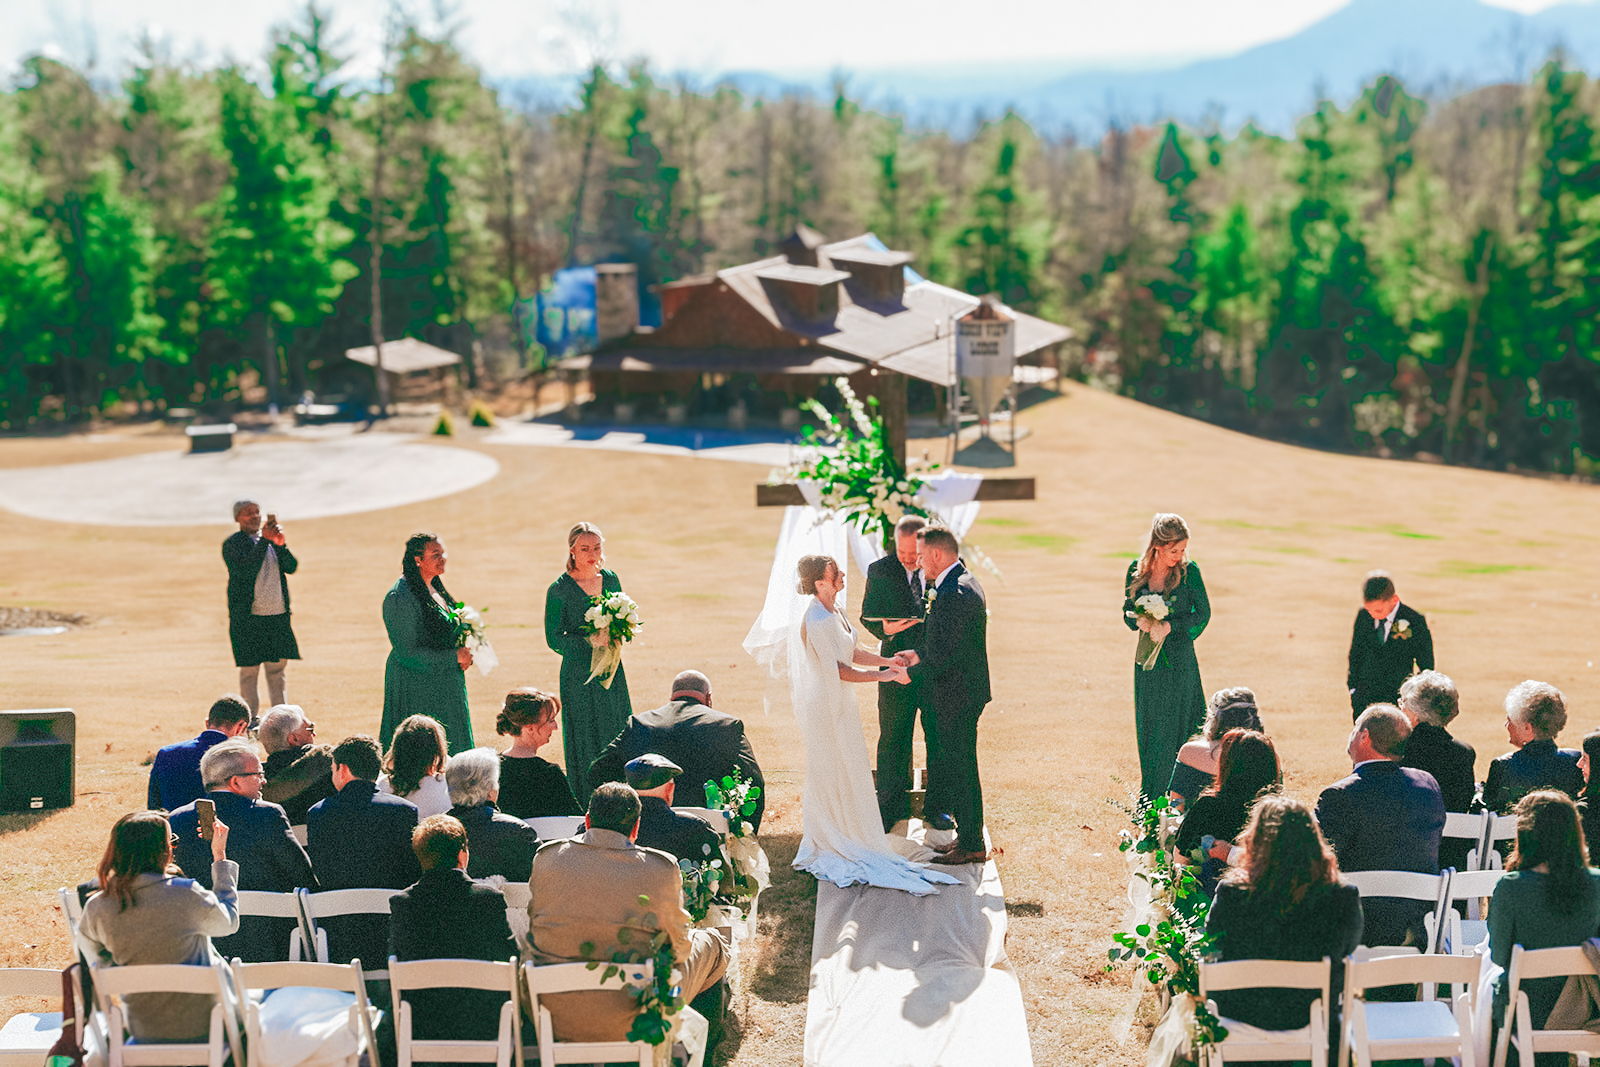 Welcome to our newest North Georgia wedding venue: Bison View Lodge Micro Wedding Weekends!